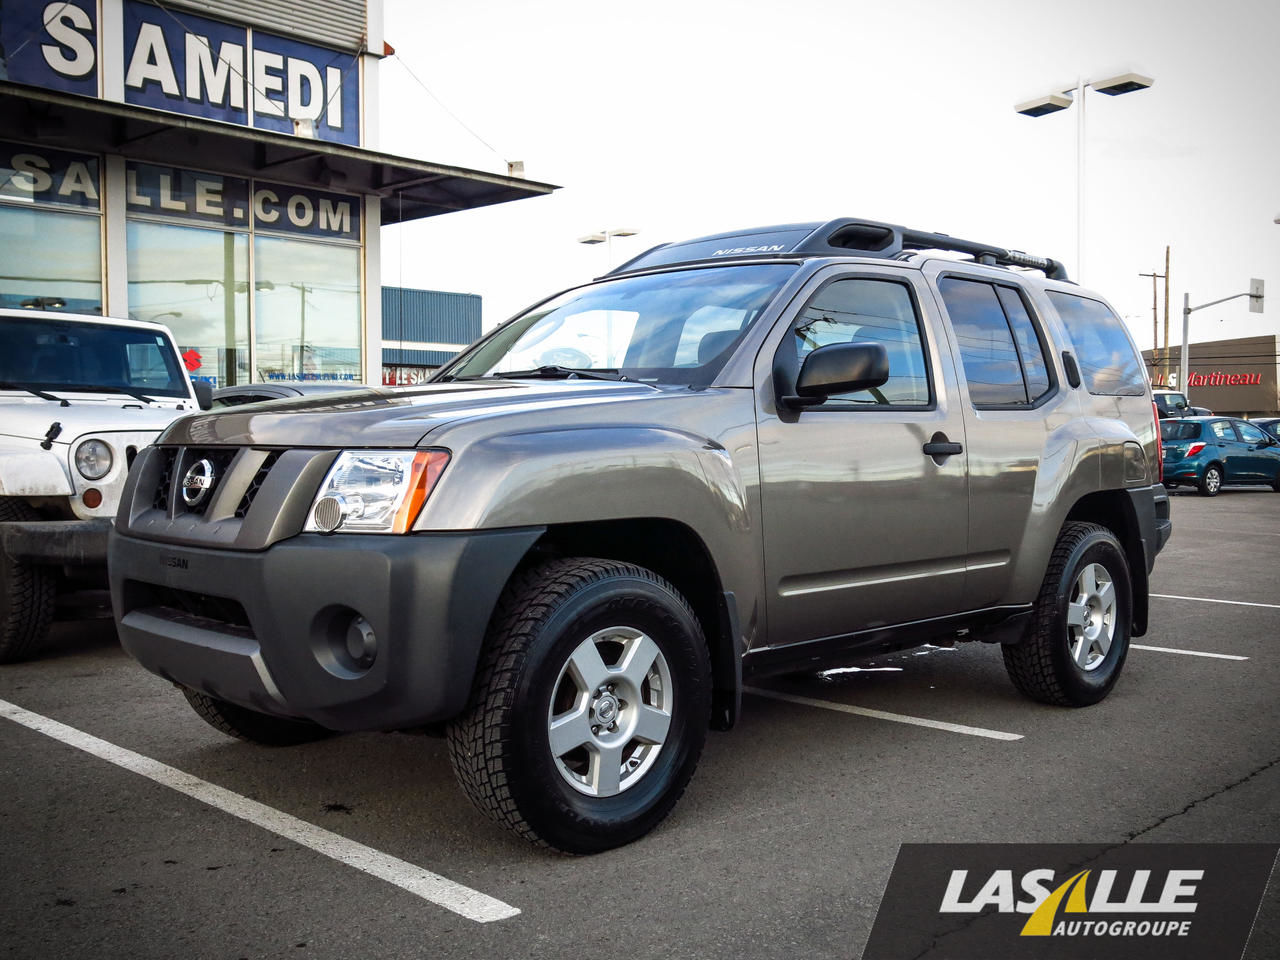 Price of a 2005 nissan xterra